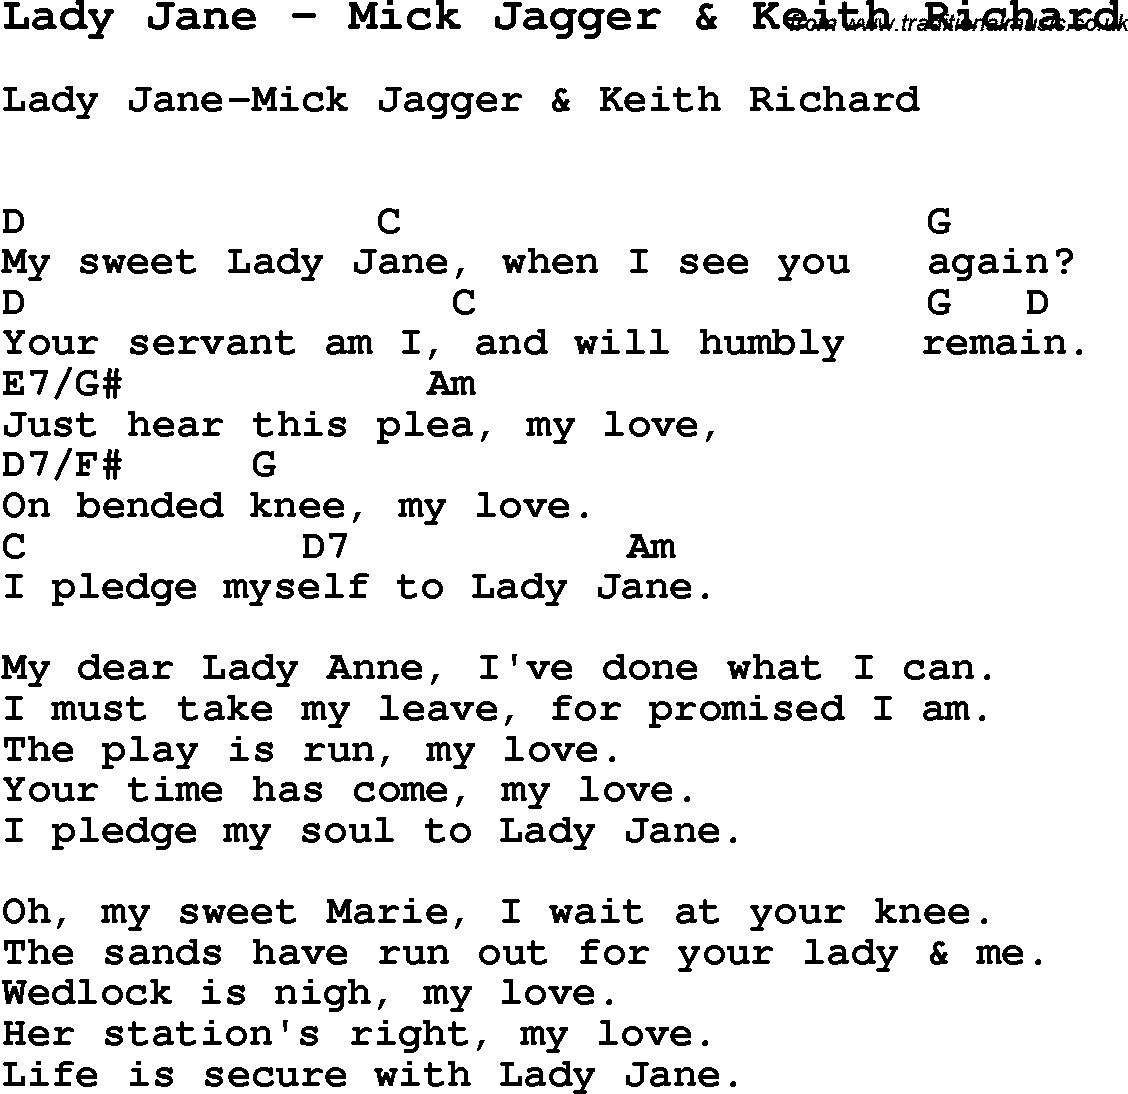 Song Lady Jane by Mick Jagger & Keith Richard, with lyrics for vocal performance and accompaniment chords for Ukulele, Guitar Banjo etc.